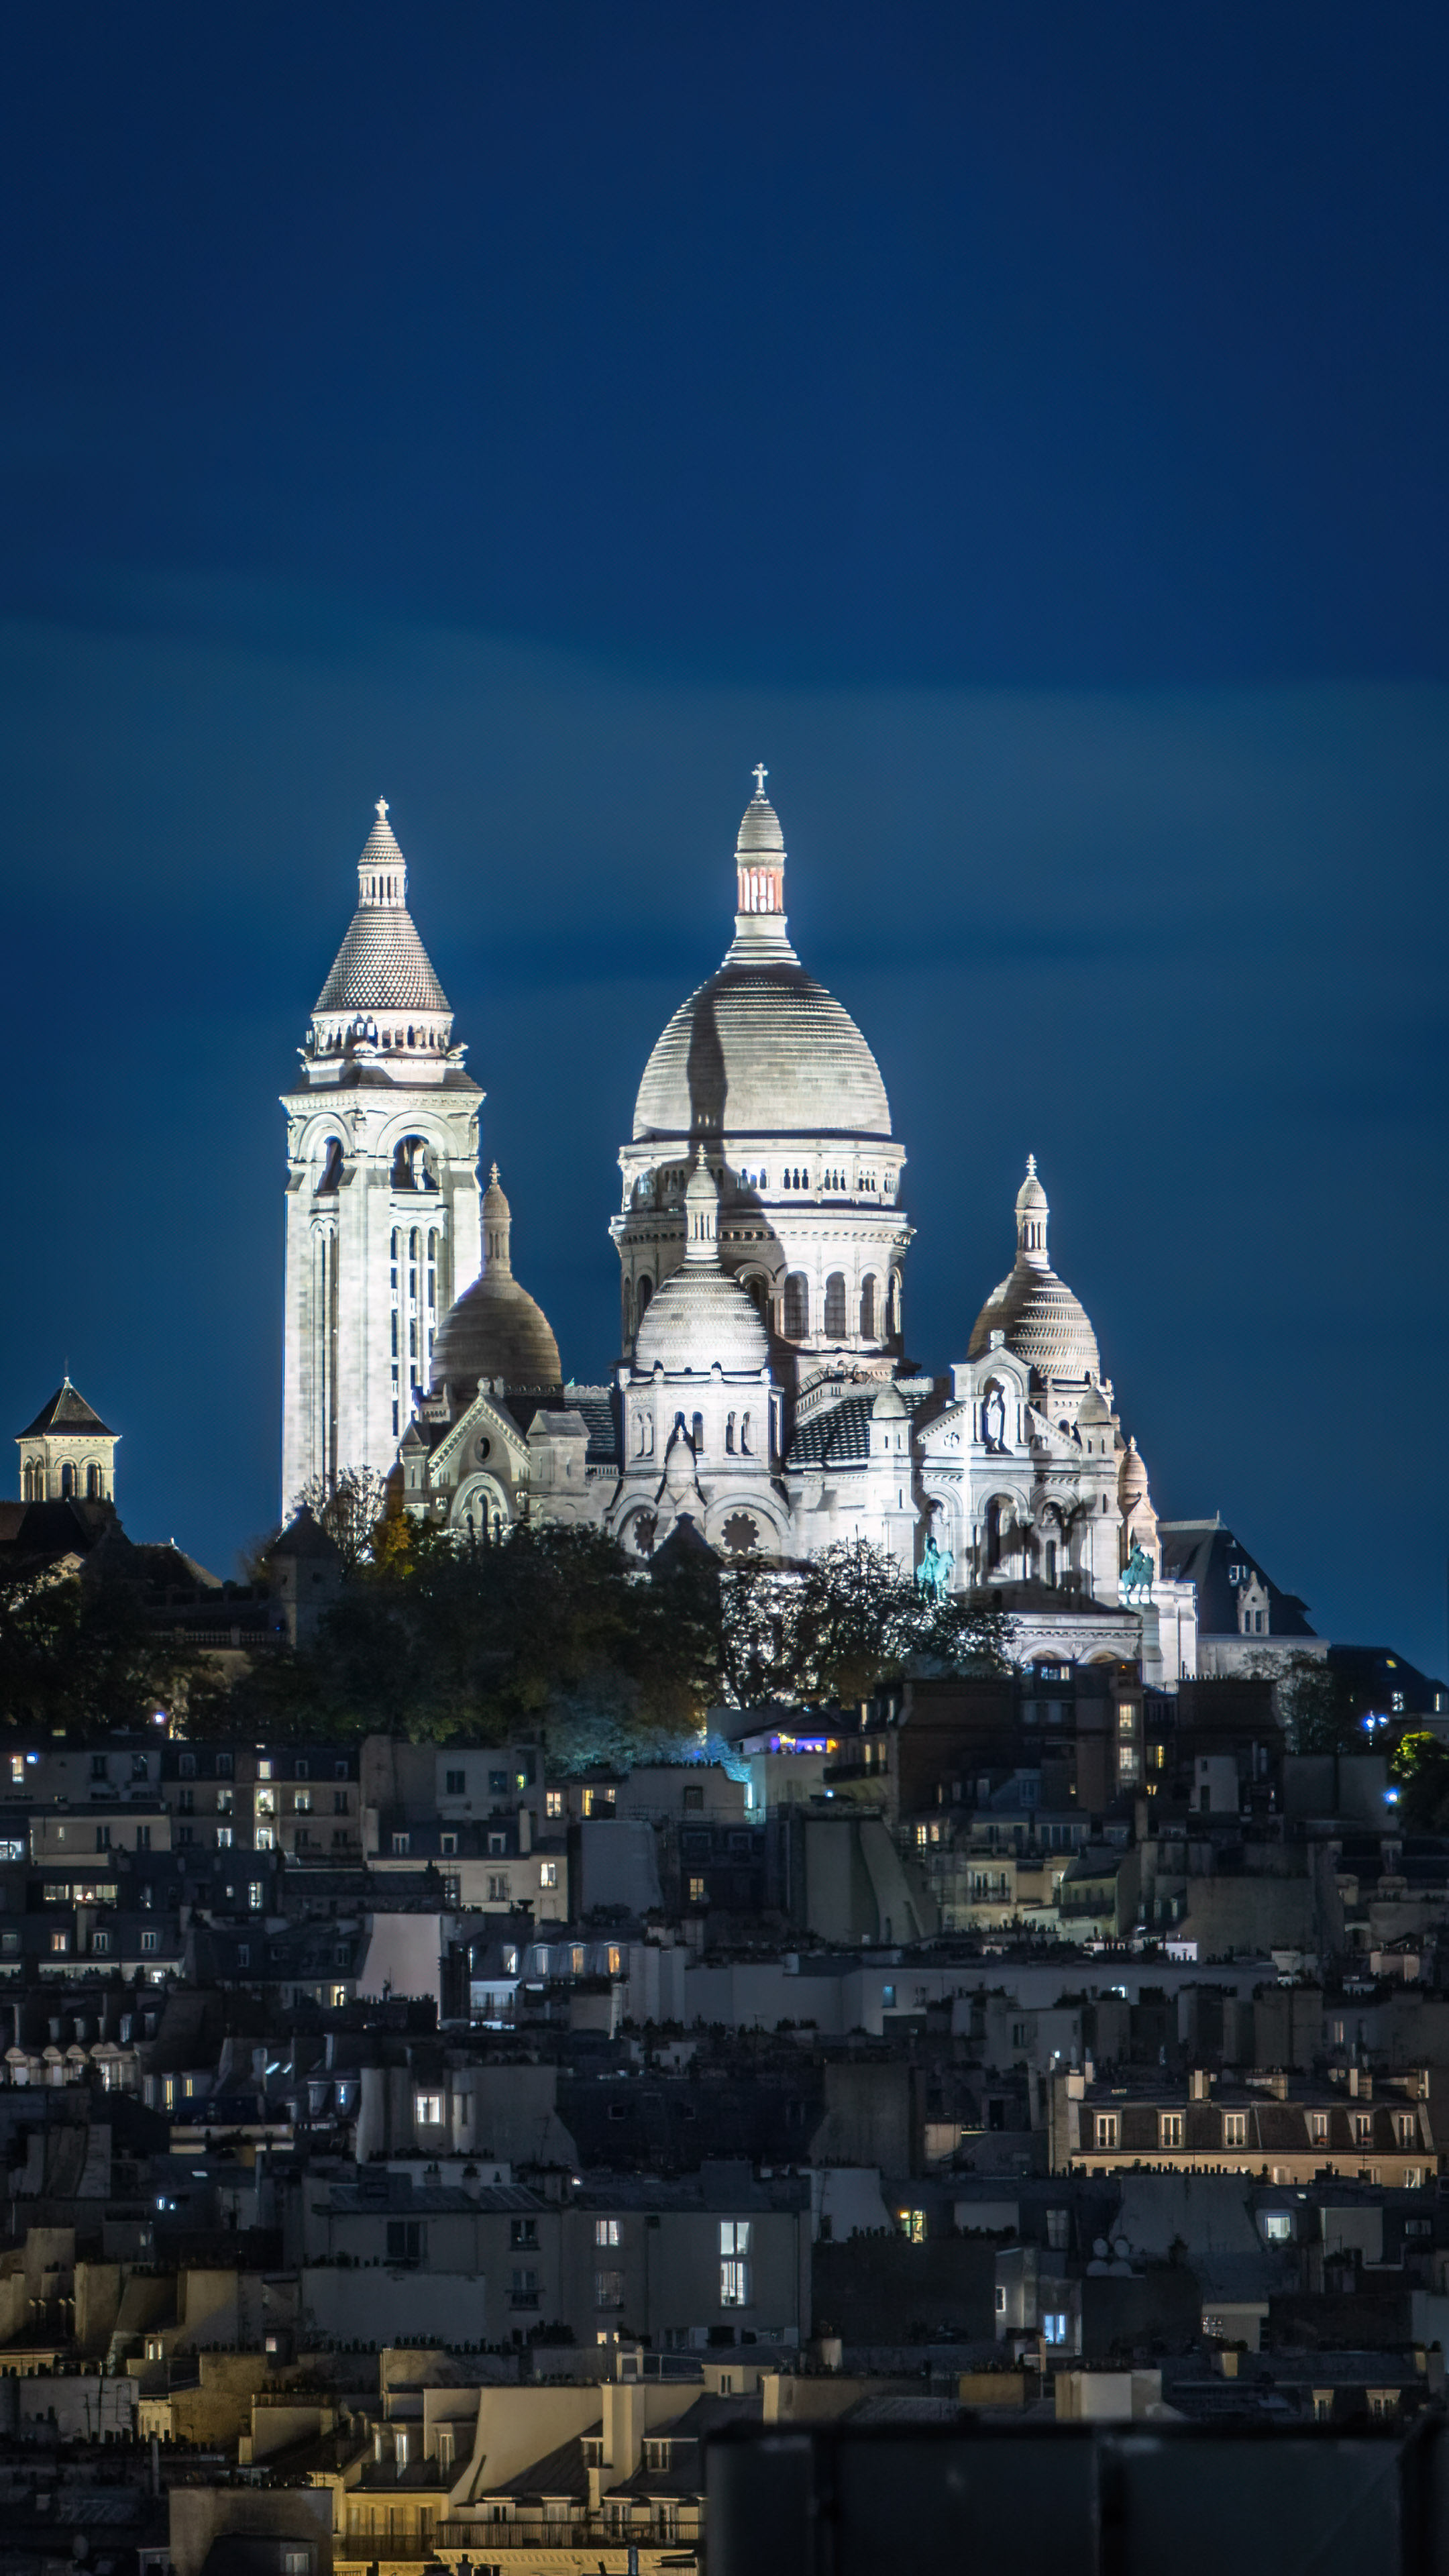 Bring the beauty of Montmartre in Paris to your screens with our HD night city wallpaper. Enjoy the breathtaking cityscape at night.